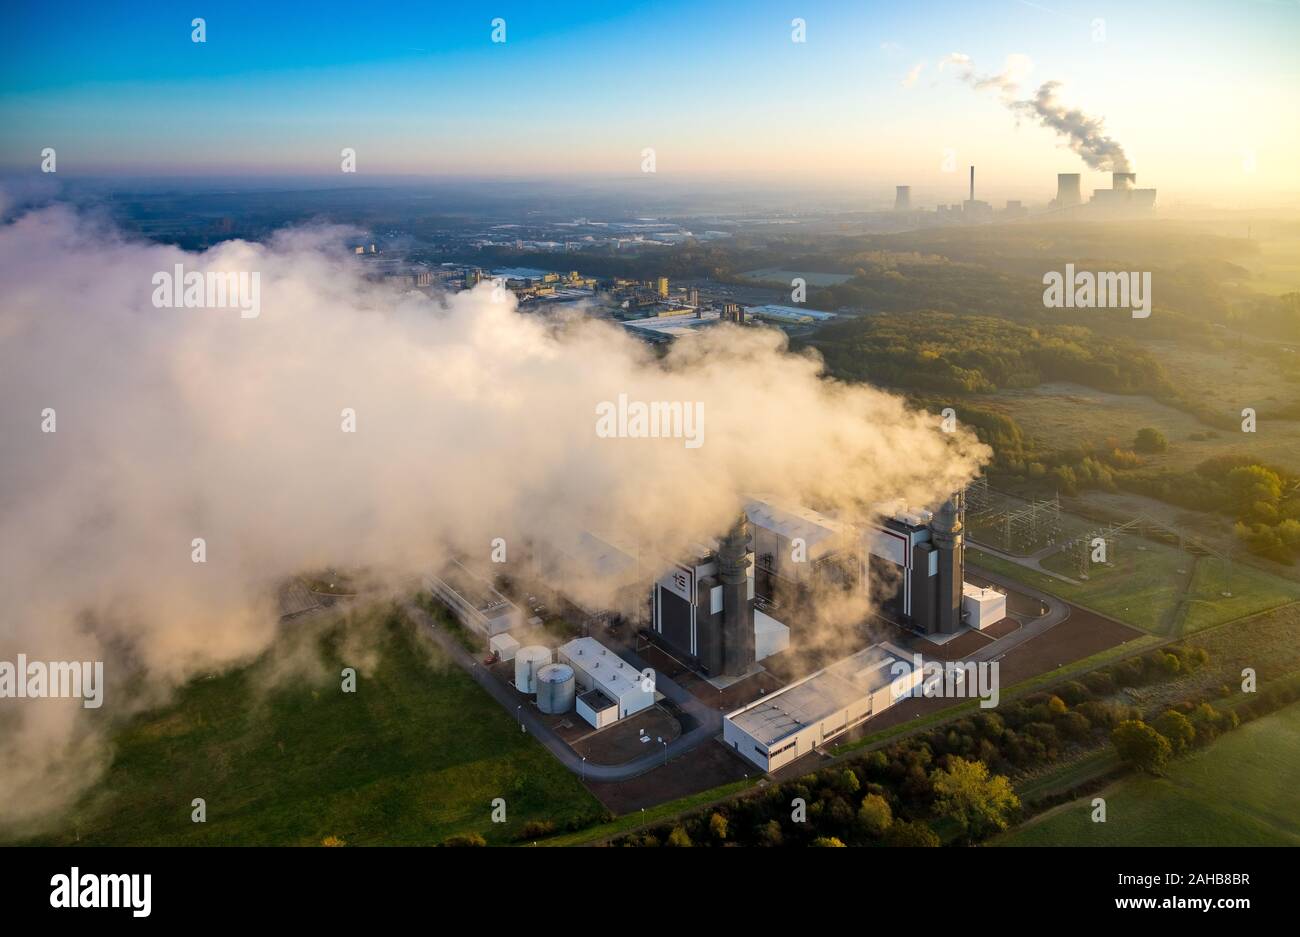 Aerial photo, gas turbine power plant, GUD, Trianel, emission, cooling exhaust air, coal-fired power plant Westfalen of RWE, morning impression, Backg Stock Photo